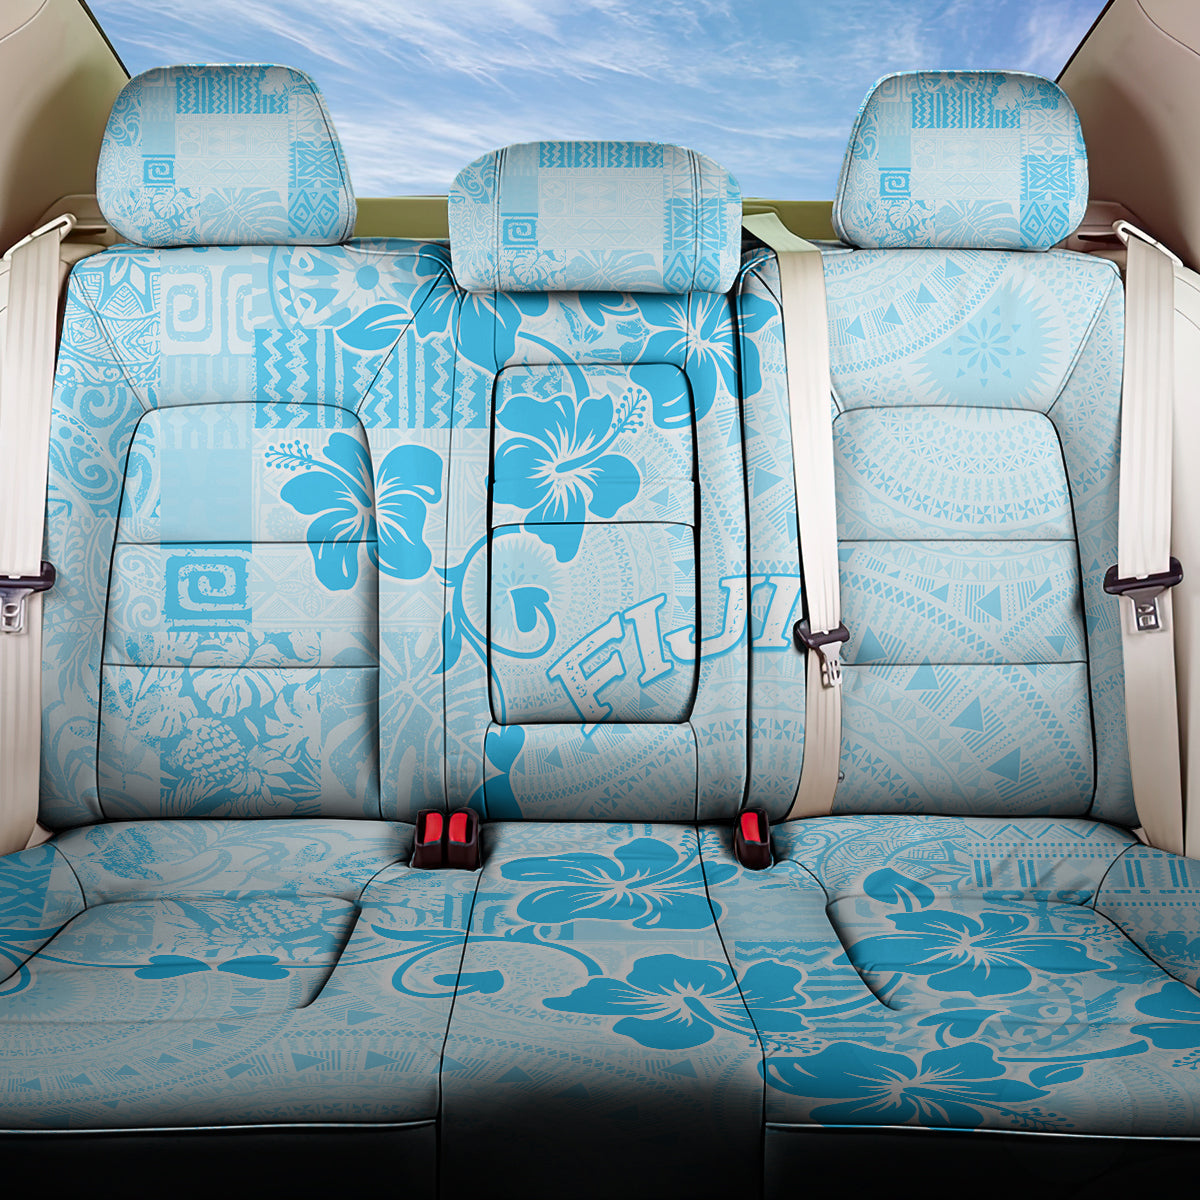 Fiji Masi With Hibiscus Tapa Tribal Back Car Seat Cover Sky Blue Pastel LT01 One Size Blue - Polynesian Pride